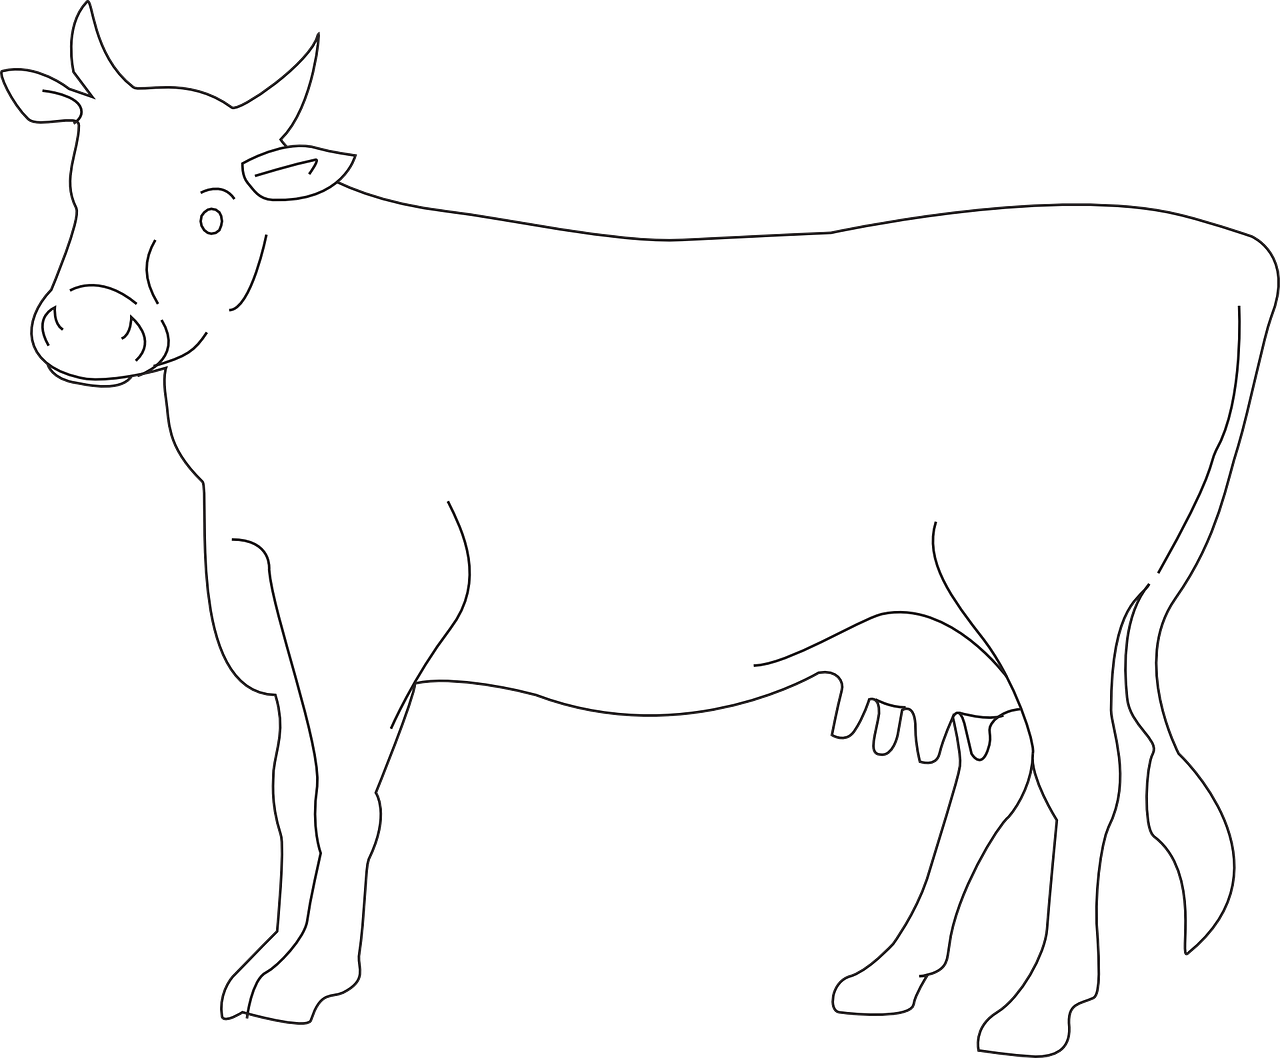 Outlined Dairy Cow Illustration PNG image